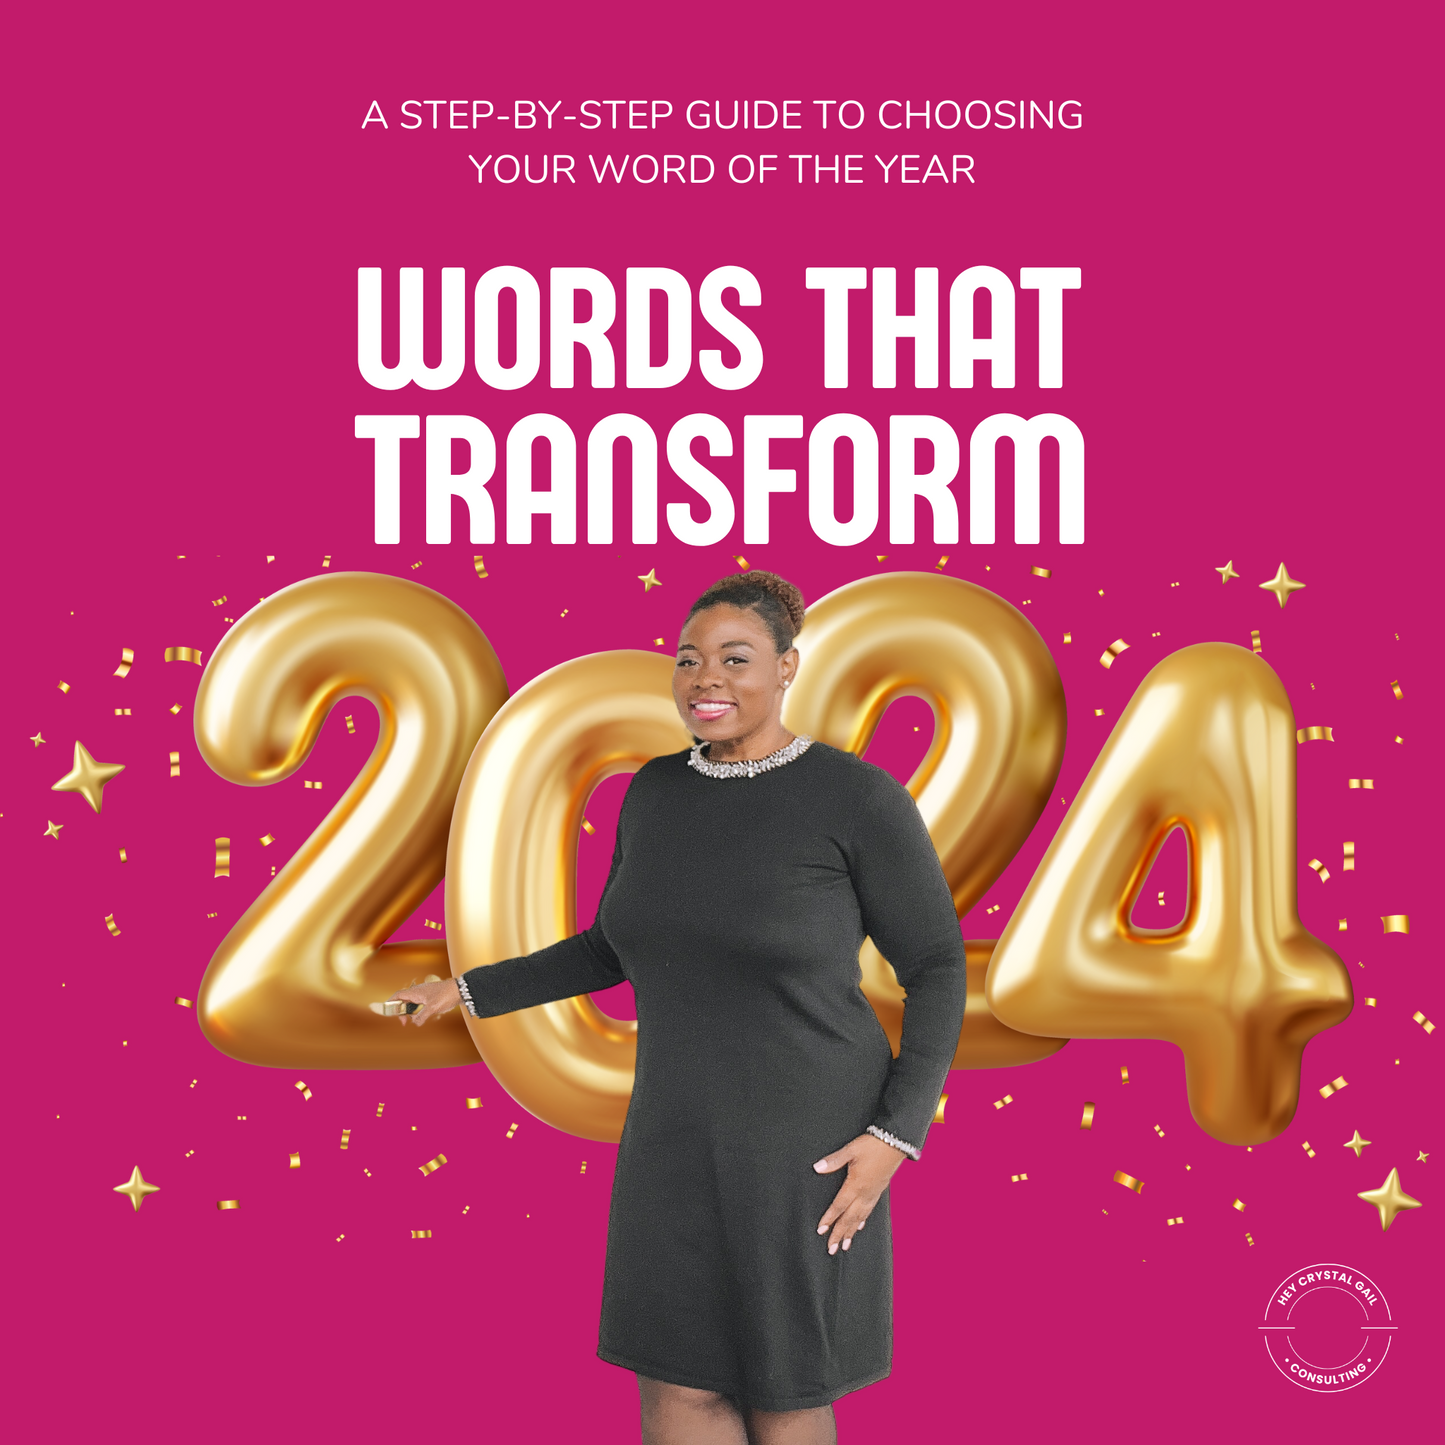 Words That Transform: A Step-By-Step Guide To Choosing Your Word of the Year